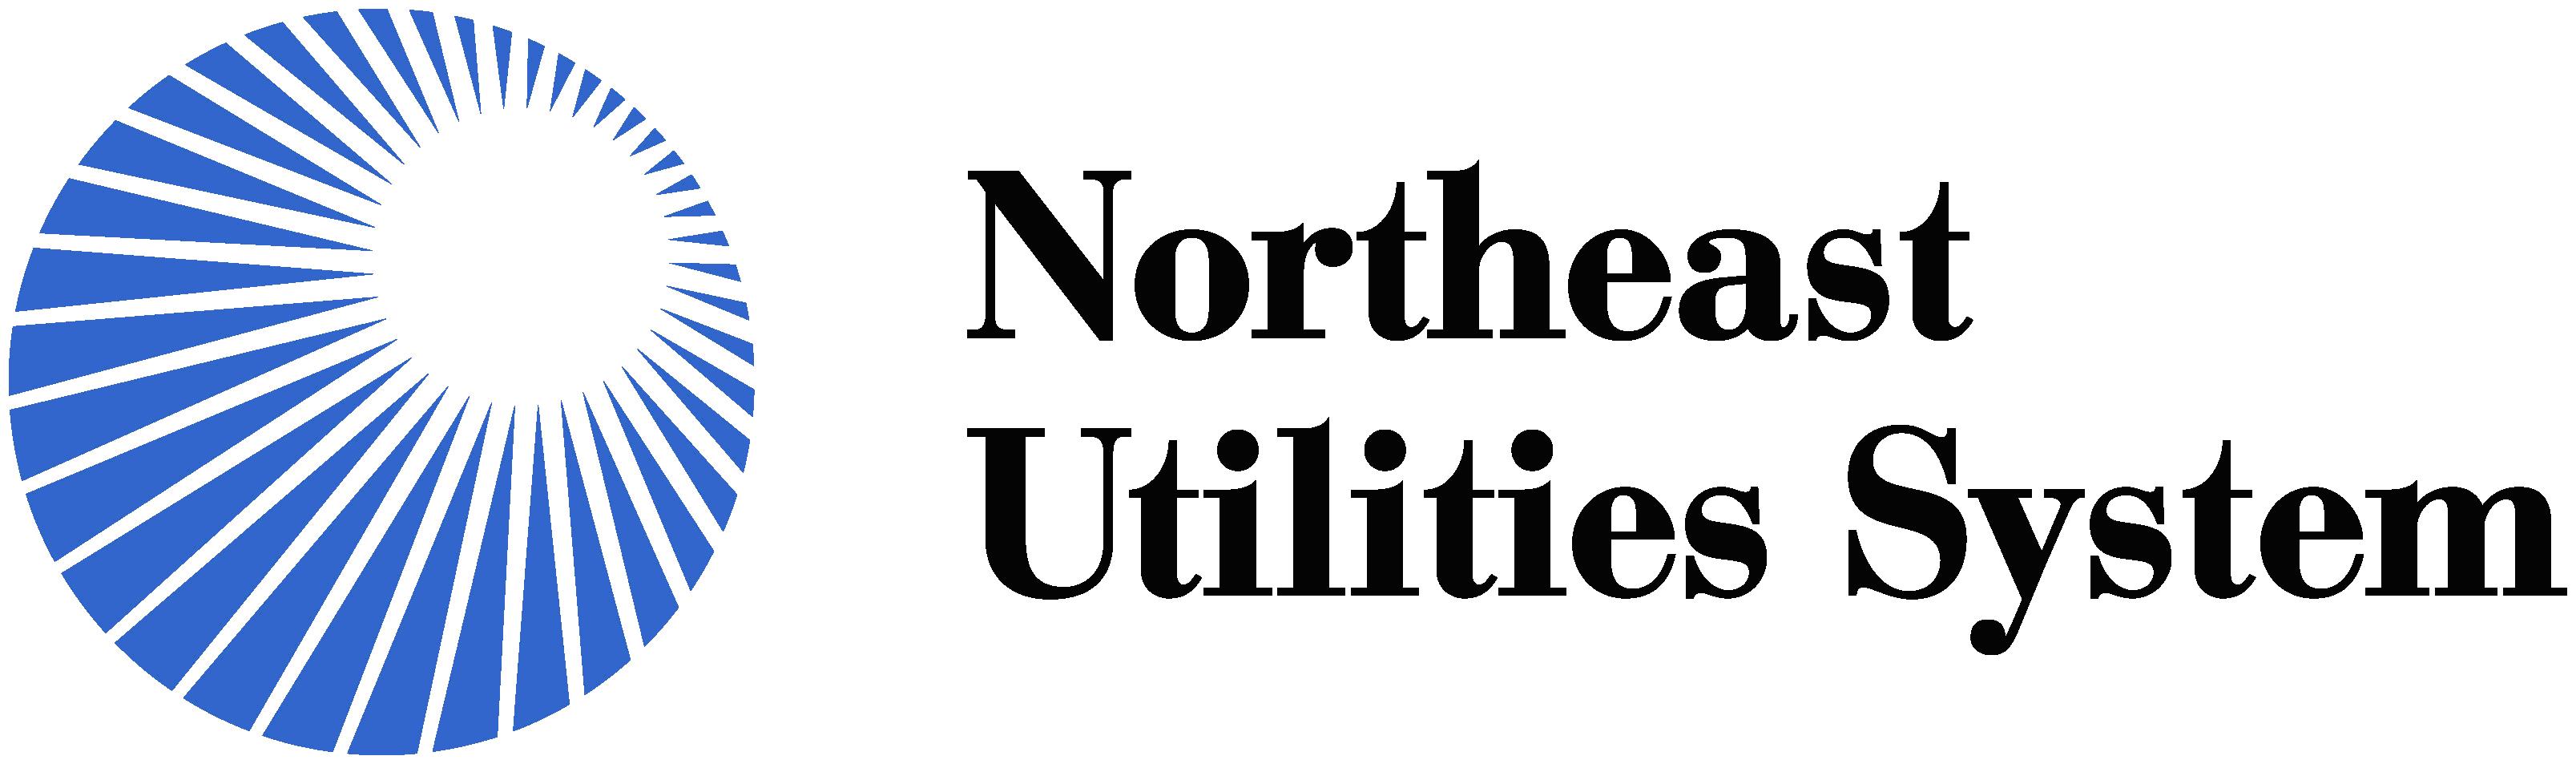 Northeast Utilities Releases First Corporate Social Responsibility Report Image